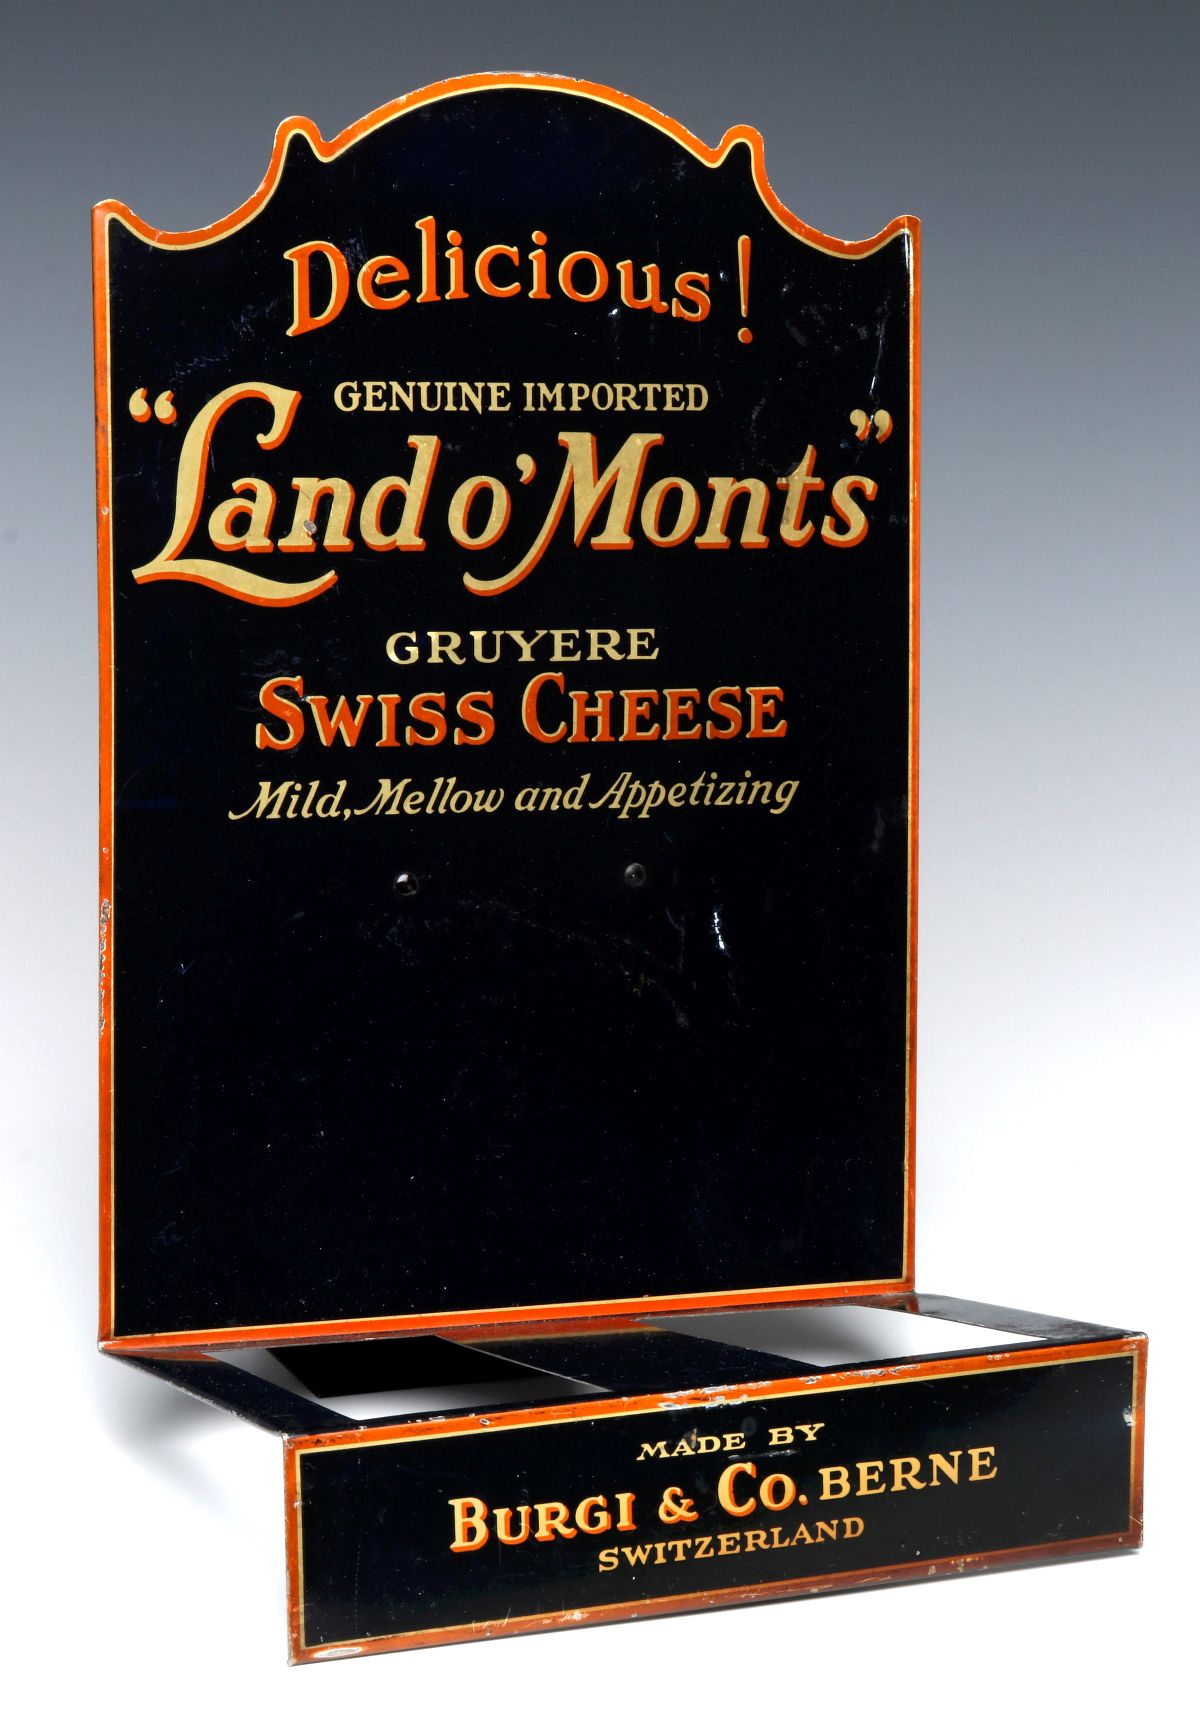 LAND O' MONTS DELICIOUS SWISS CHEESE ADVTG DISPLAY